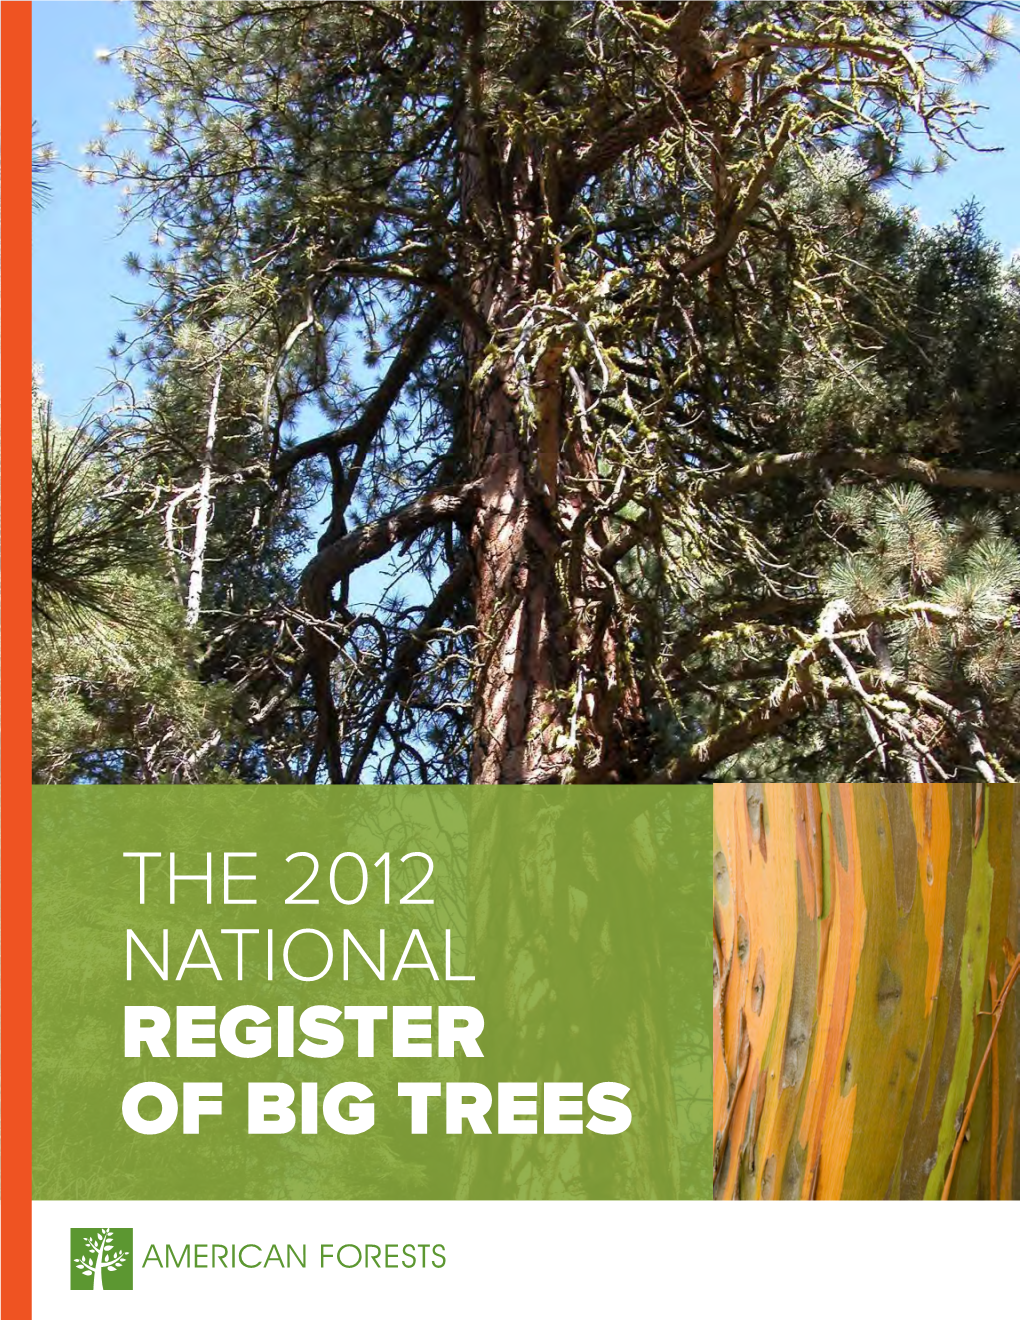 The 2012 National Register of Big Trees